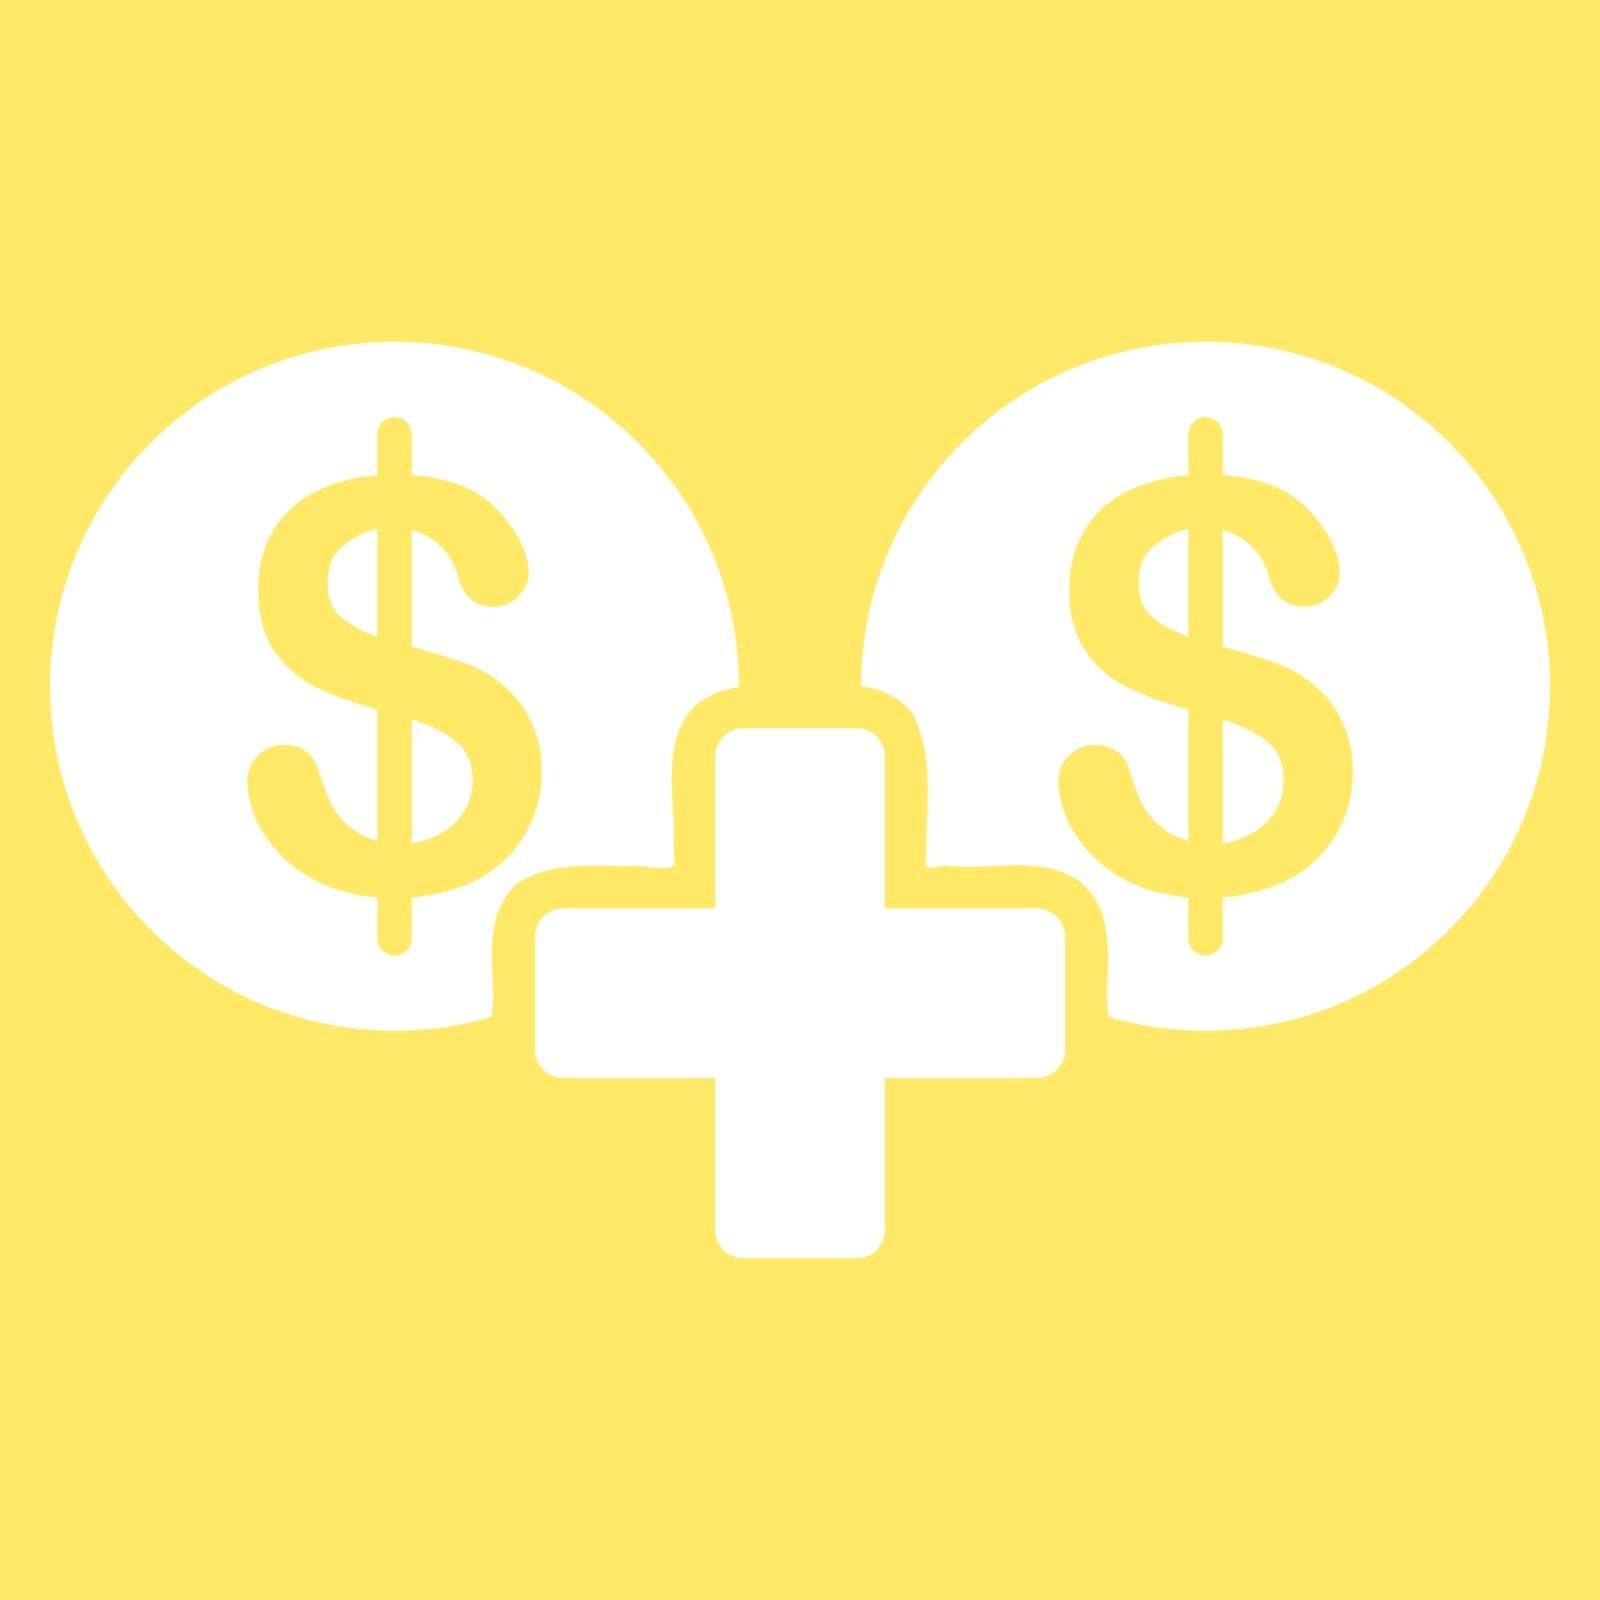 Sum icon from Business Bicolor Set. This flat vector symbol uses white color, rounded angles, and isolated on a yellow background.